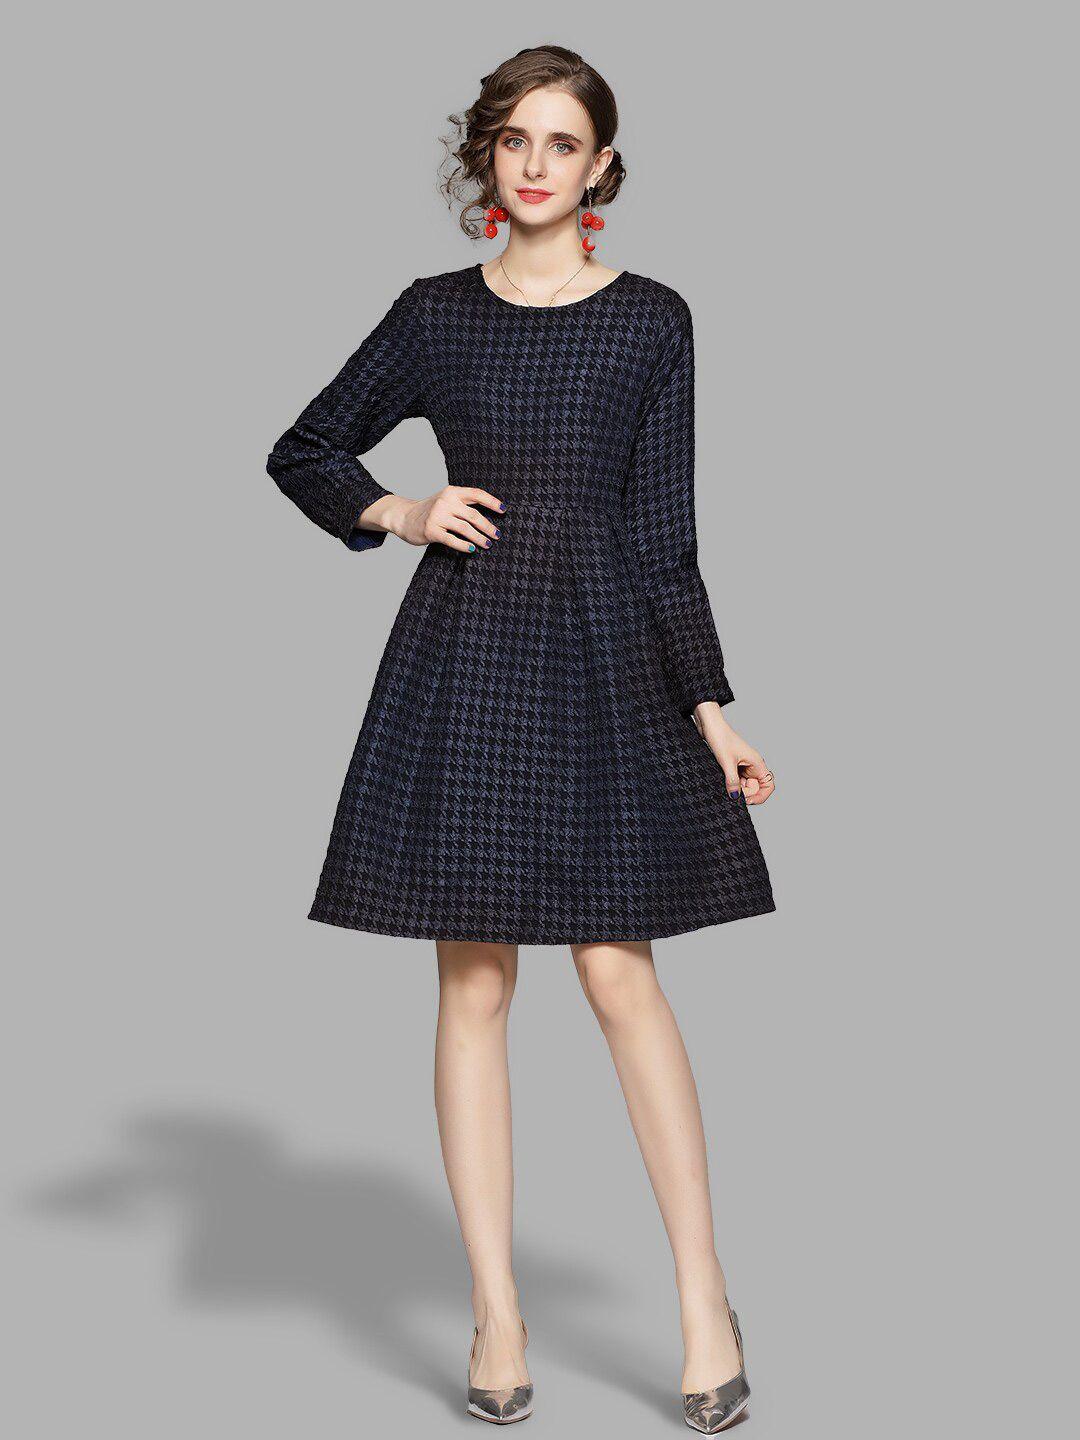 jc collection navy blue printed fit and flare dress